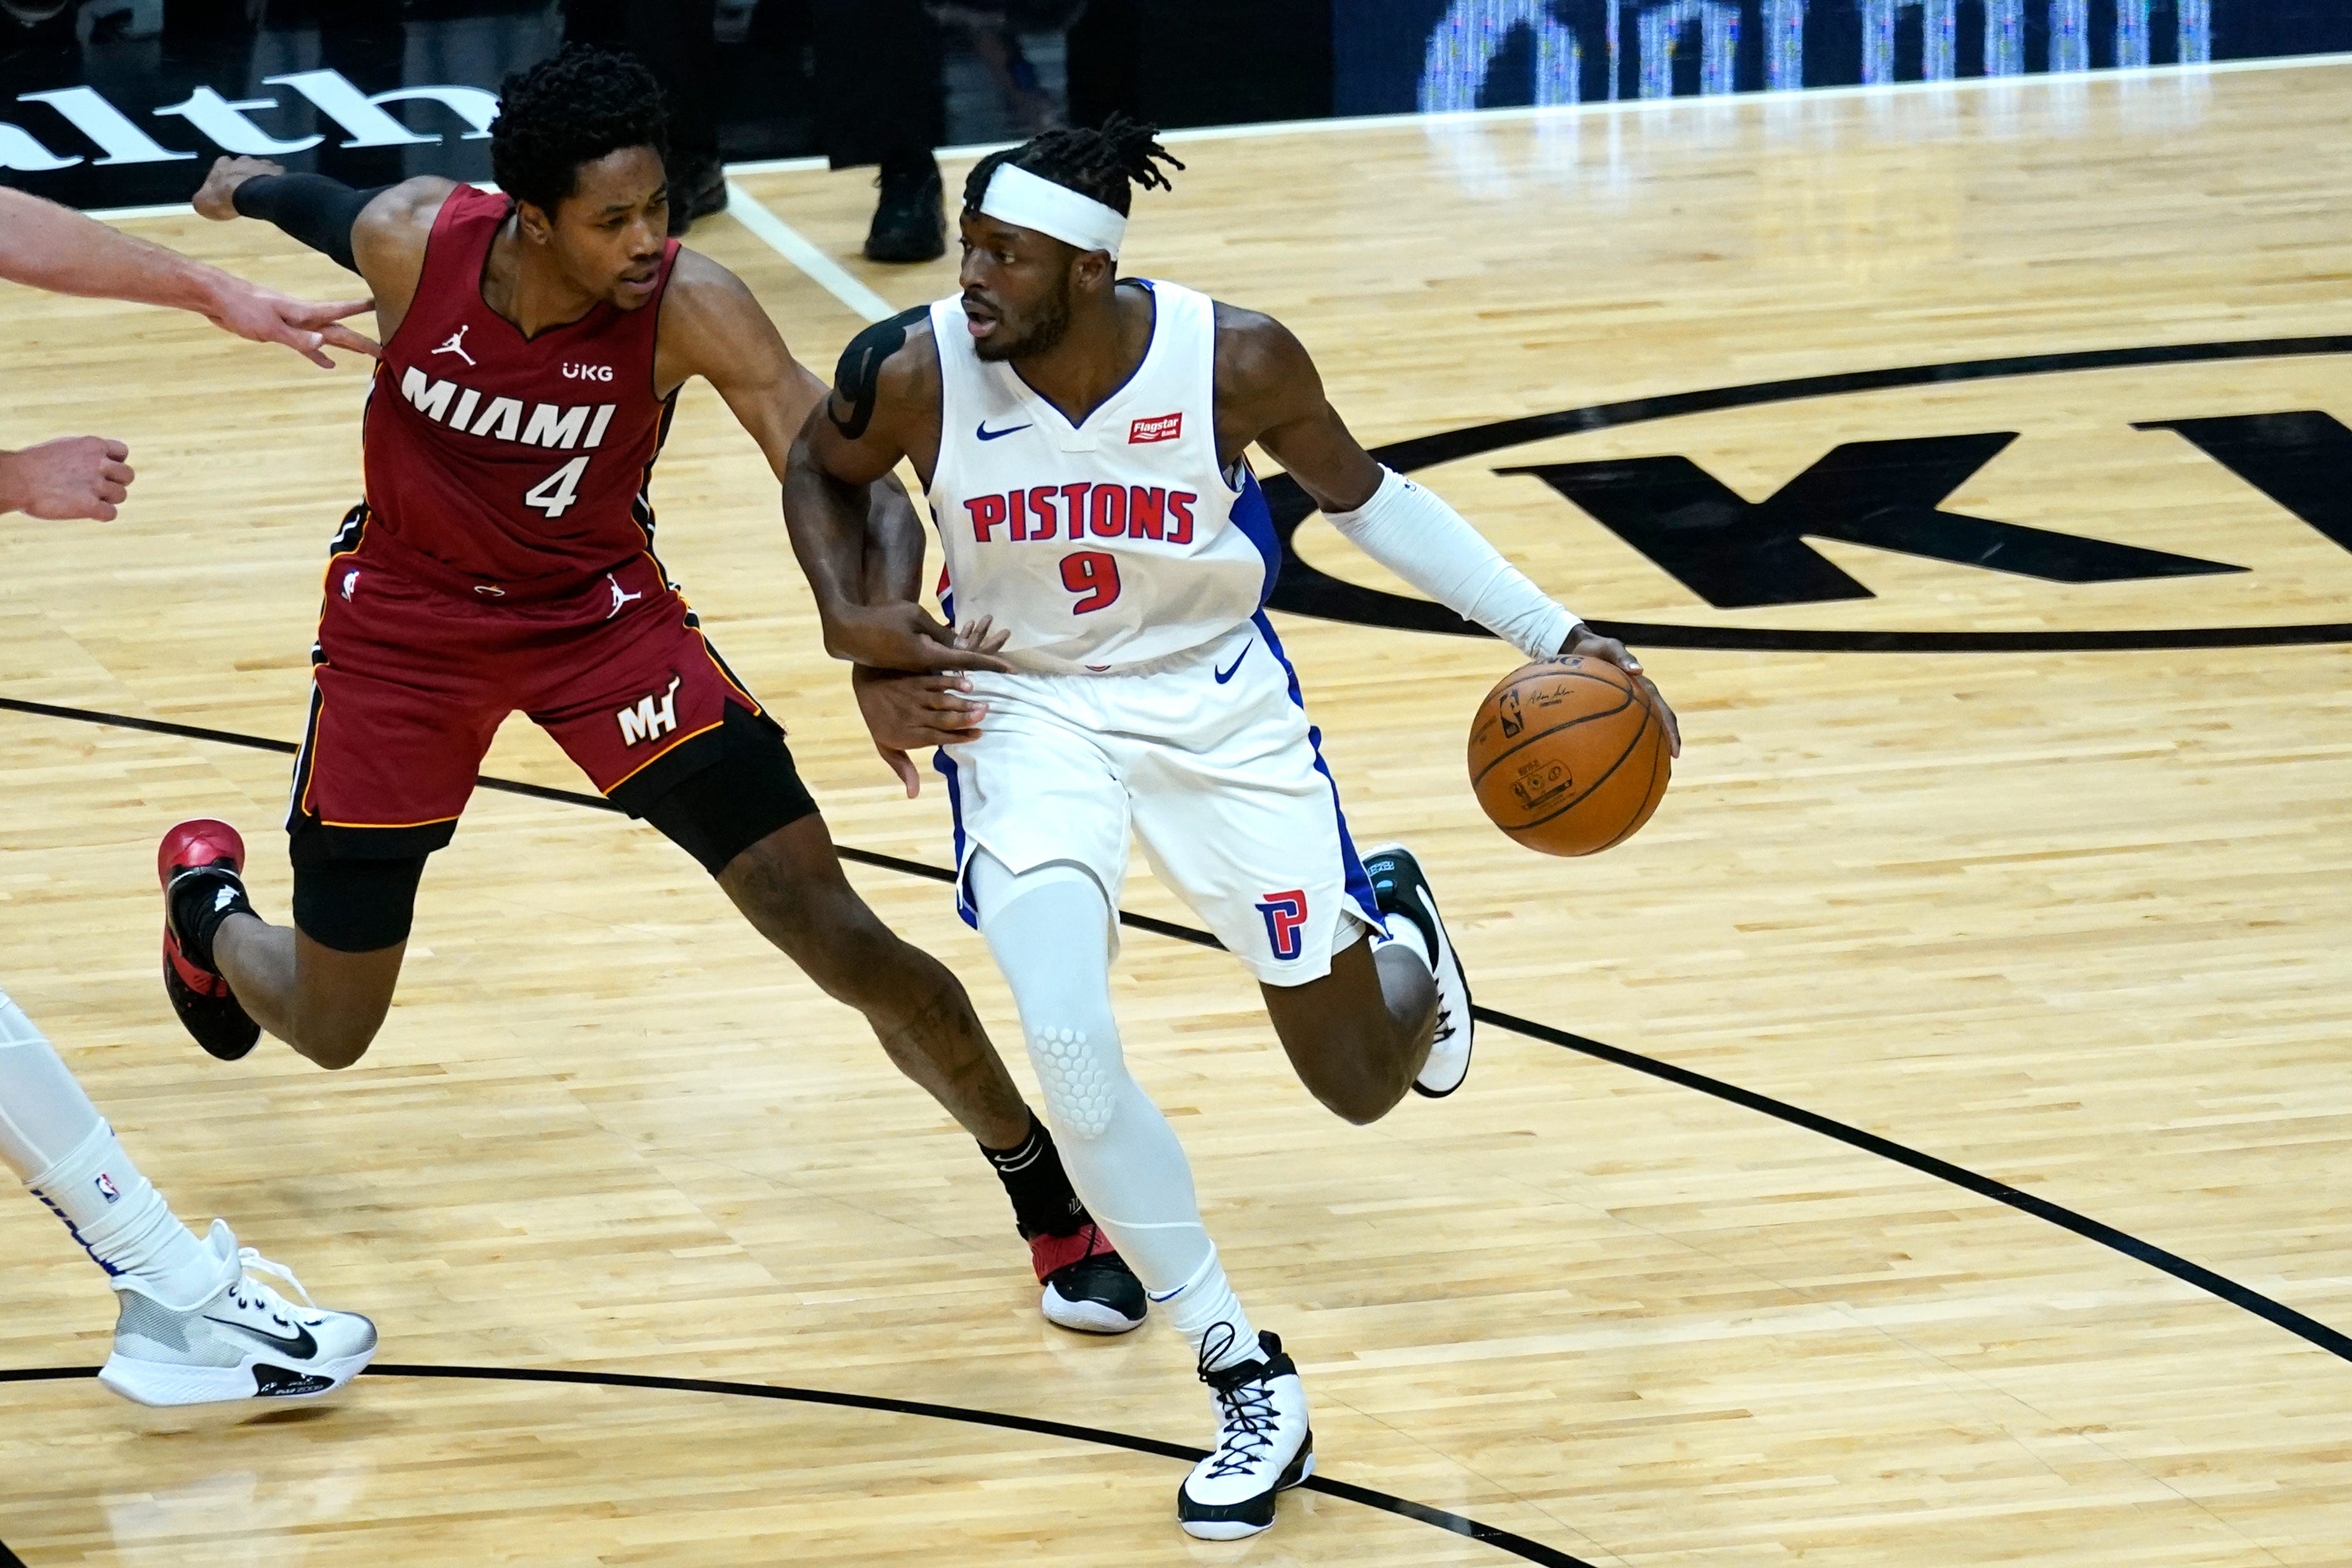 Detroit Pistons forward Jerami Grant (9) drives to the basket as Miami Heat forward KZ Okpala (4) defends during the first half.